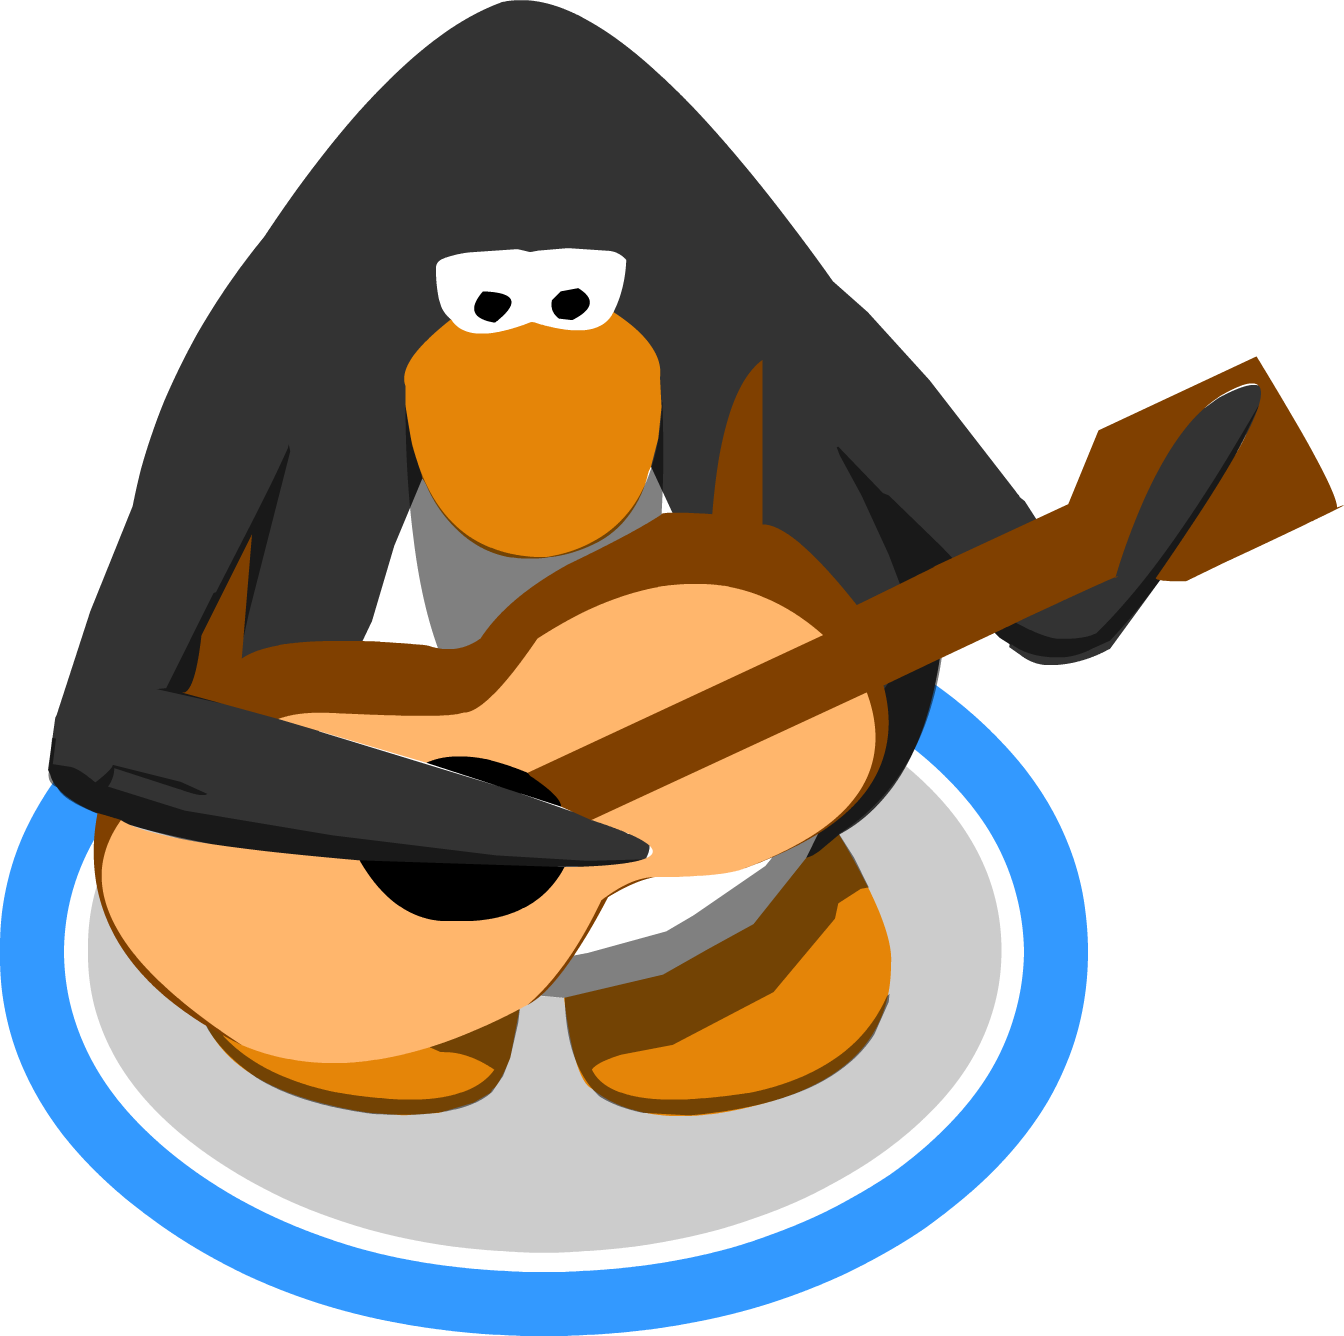 Acoustic Guitar Special Dance - Club Penguin 10th Anniversary Hat (1344x1336)